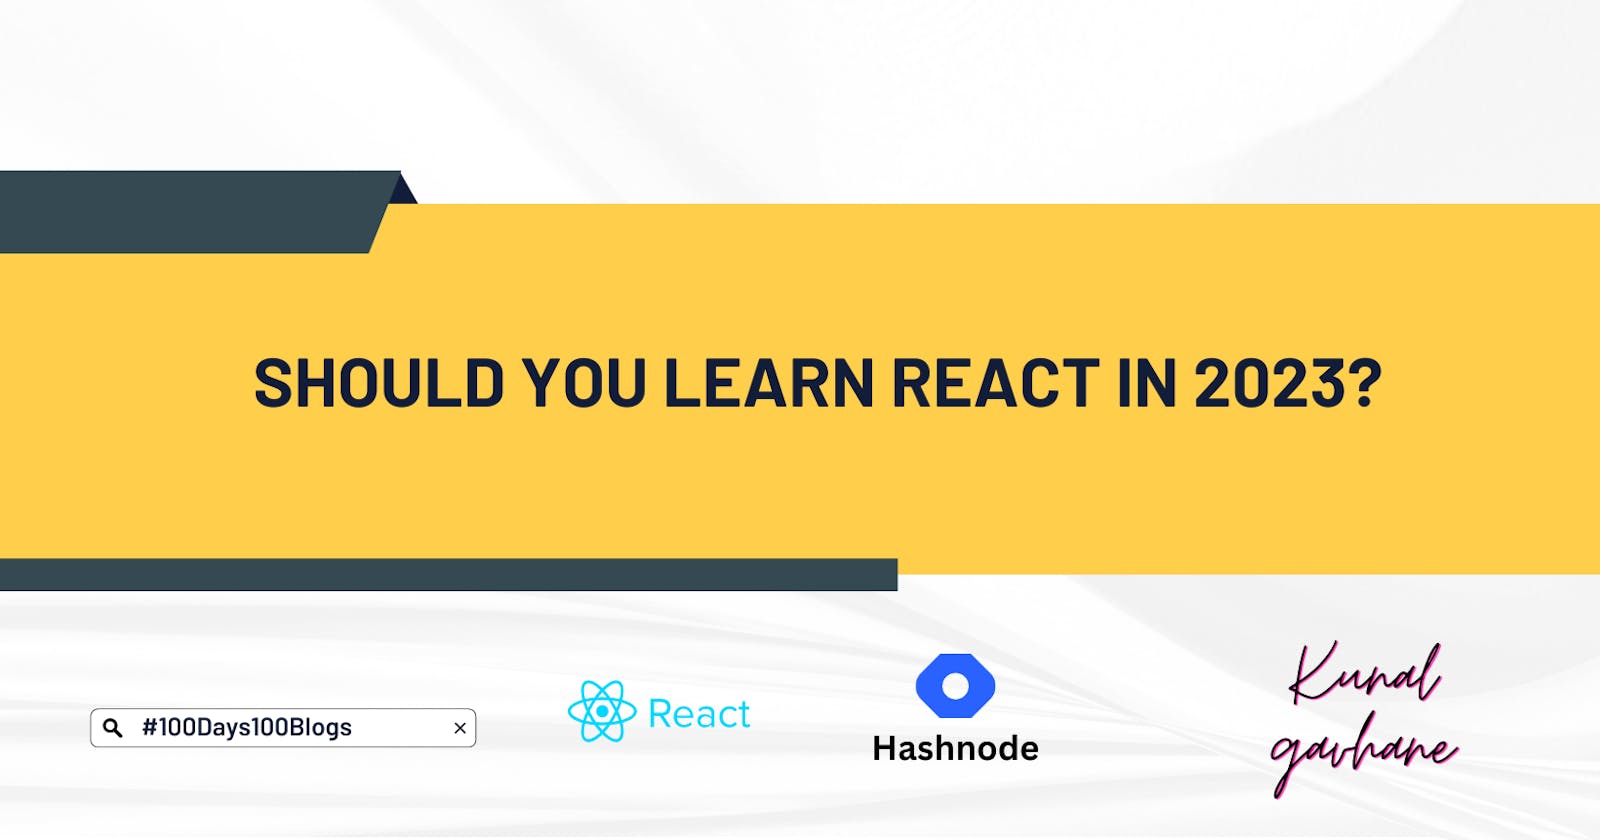 Should You Learn React in 2023?